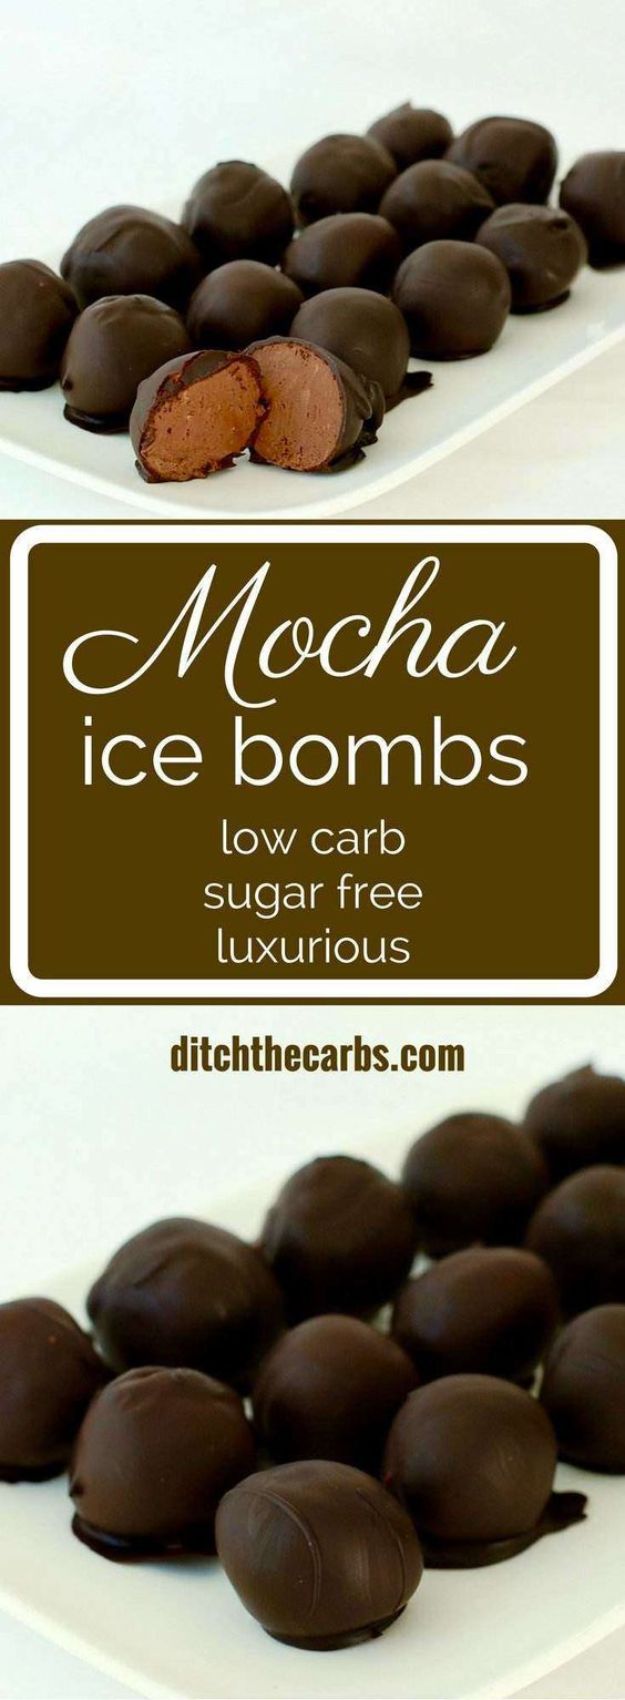 Low Sugar Dessert Recipes - Mocha Ice Bombs - Healthy Desserts and Ideas for Healthy Sweets Without Much Sugar - Raw Foods and Easy Clean Eating Dessert Tips, Keto Diet Snacks - Chocolate, Gluten Free, Cakes, Fruit Dips, No Bake, Stevia and Sweetener Options - Diabetic Diets and Diabetes Recipe Ideas for Desserts #recipes #recipeideas #lowsugar #nosugar #lowcalorie #diyjoy #dessertrecipes #lowsugar #dietrecipes